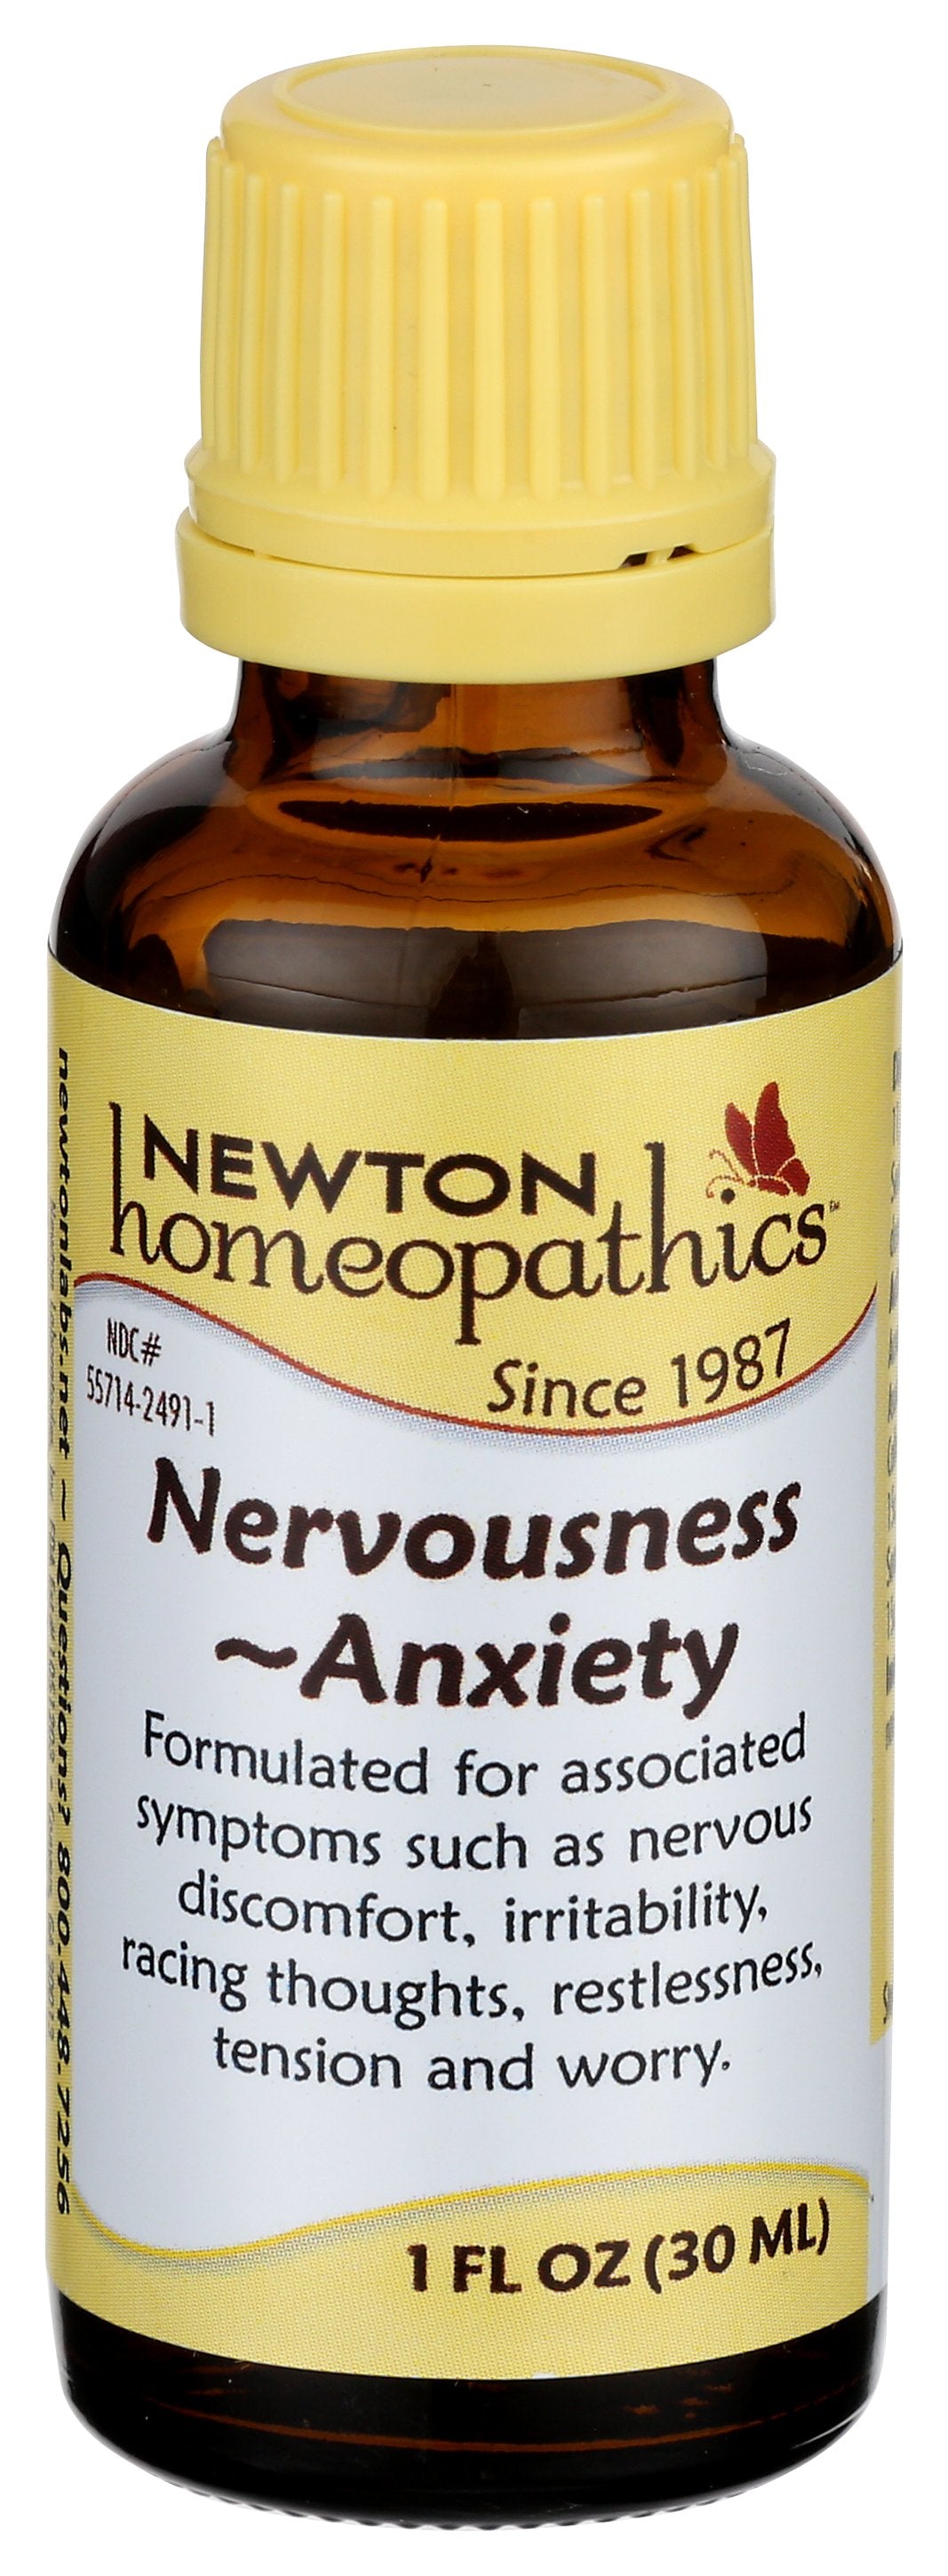 NEWTON HOMEOPATHICS NERVOUSNESS ANXIETY